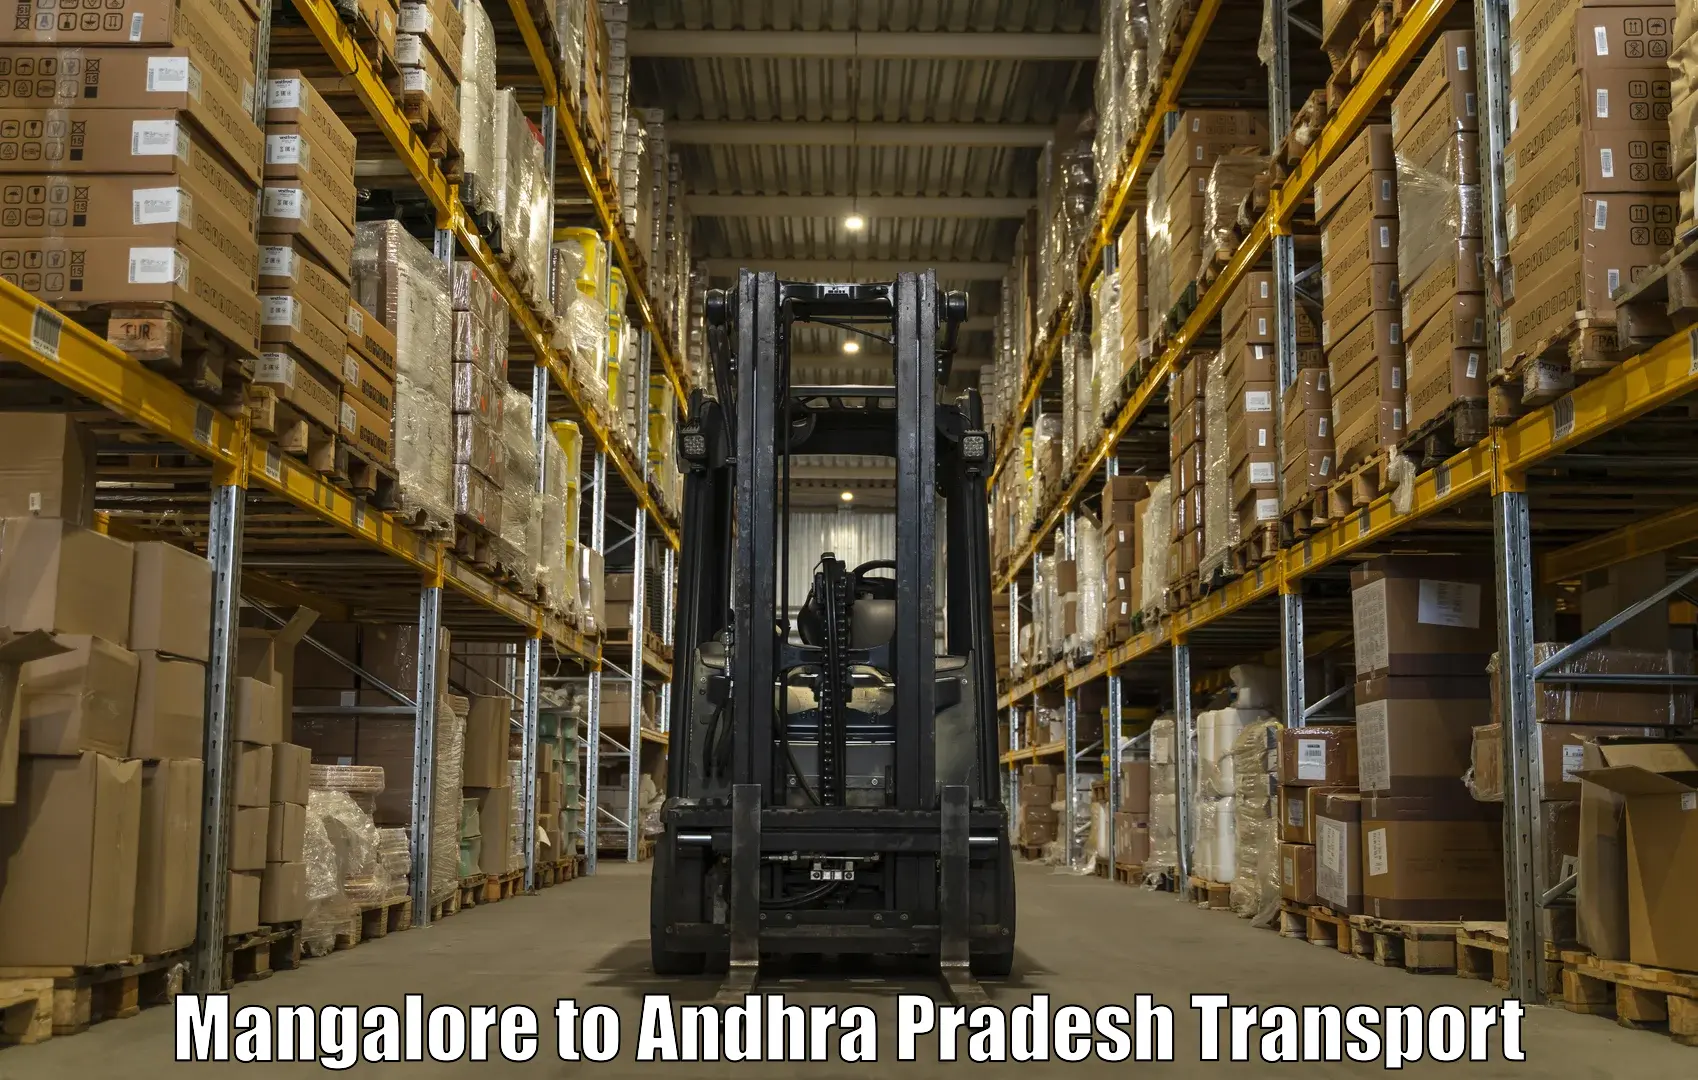 Truck transport companies in India Mangalore to Nellore